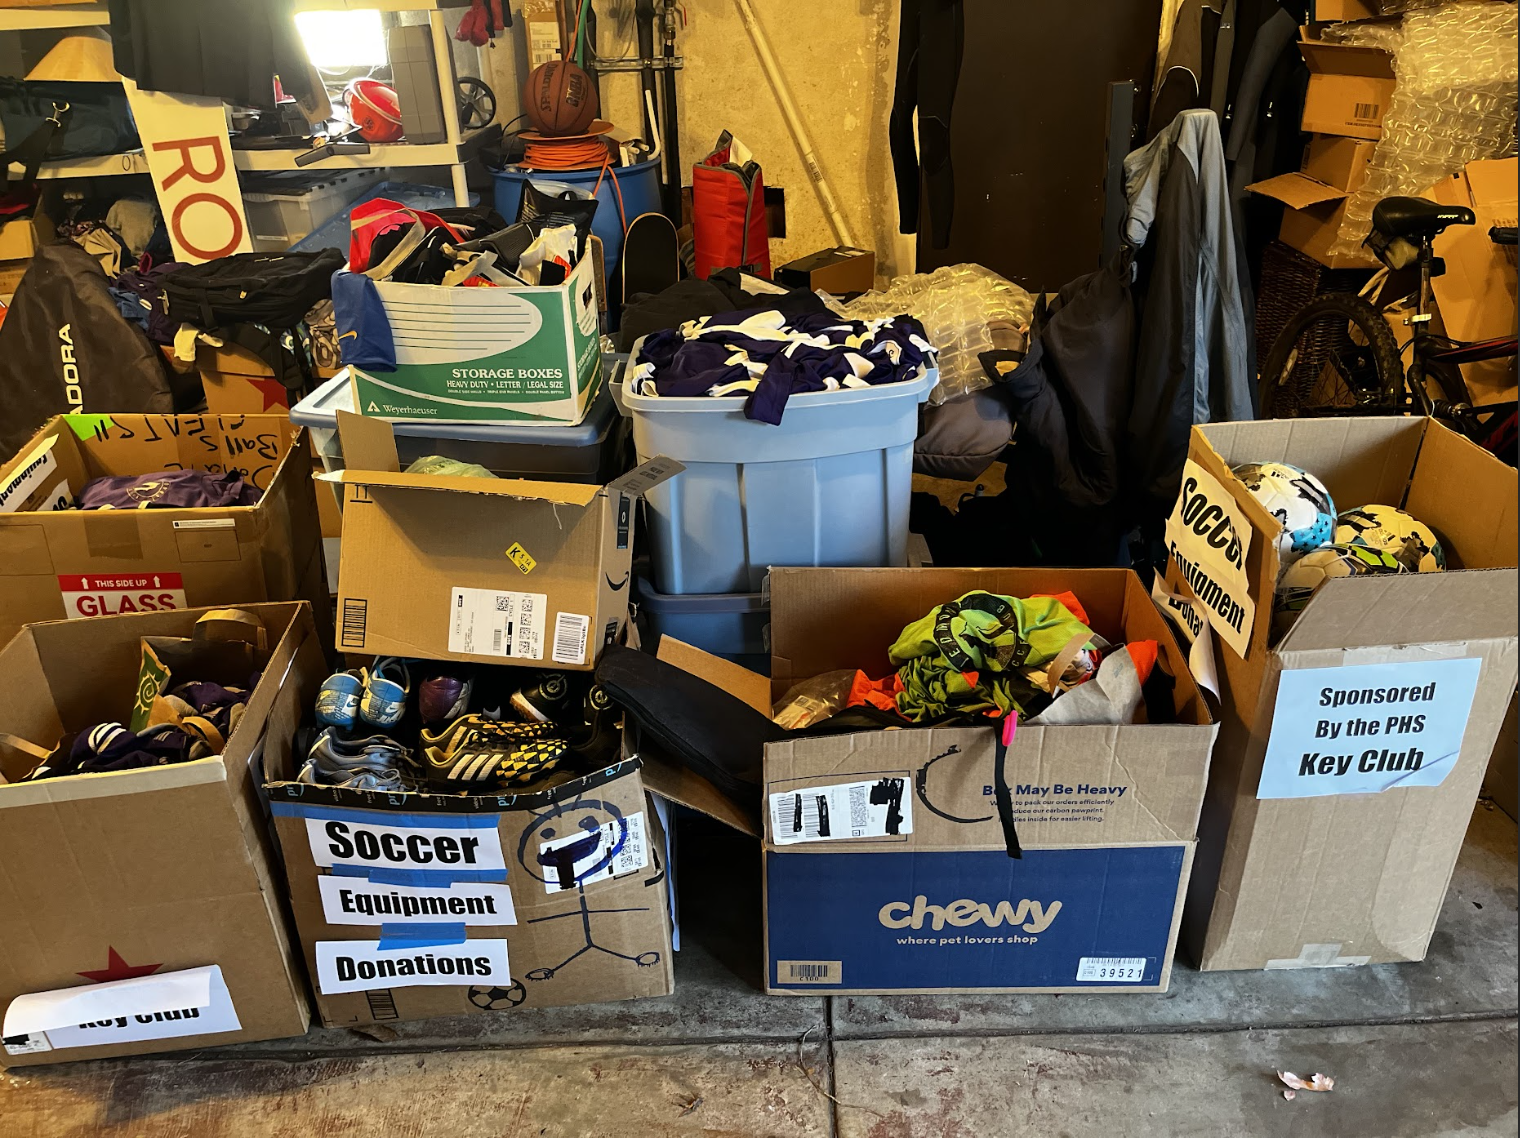 PHS Soccer Without Borders Equipment Drive by Key Club Impacting Community and Nonprofit Support